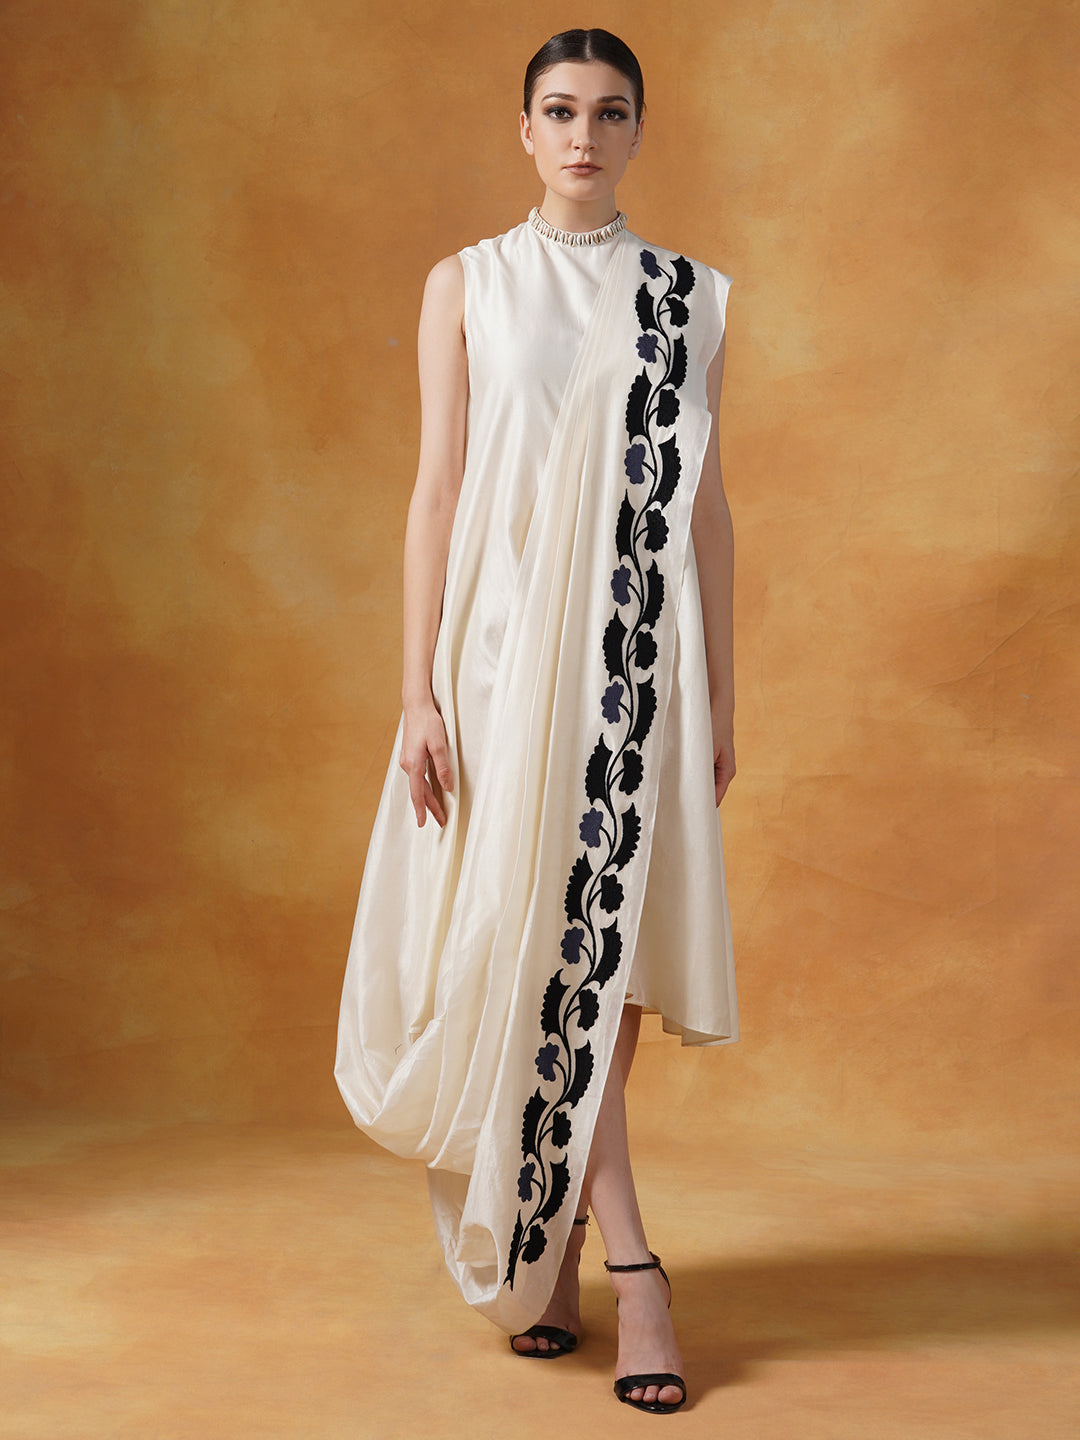 Embroidered bohemian style long jacket in linen silk, topped on an ivory cotton silk drape dress